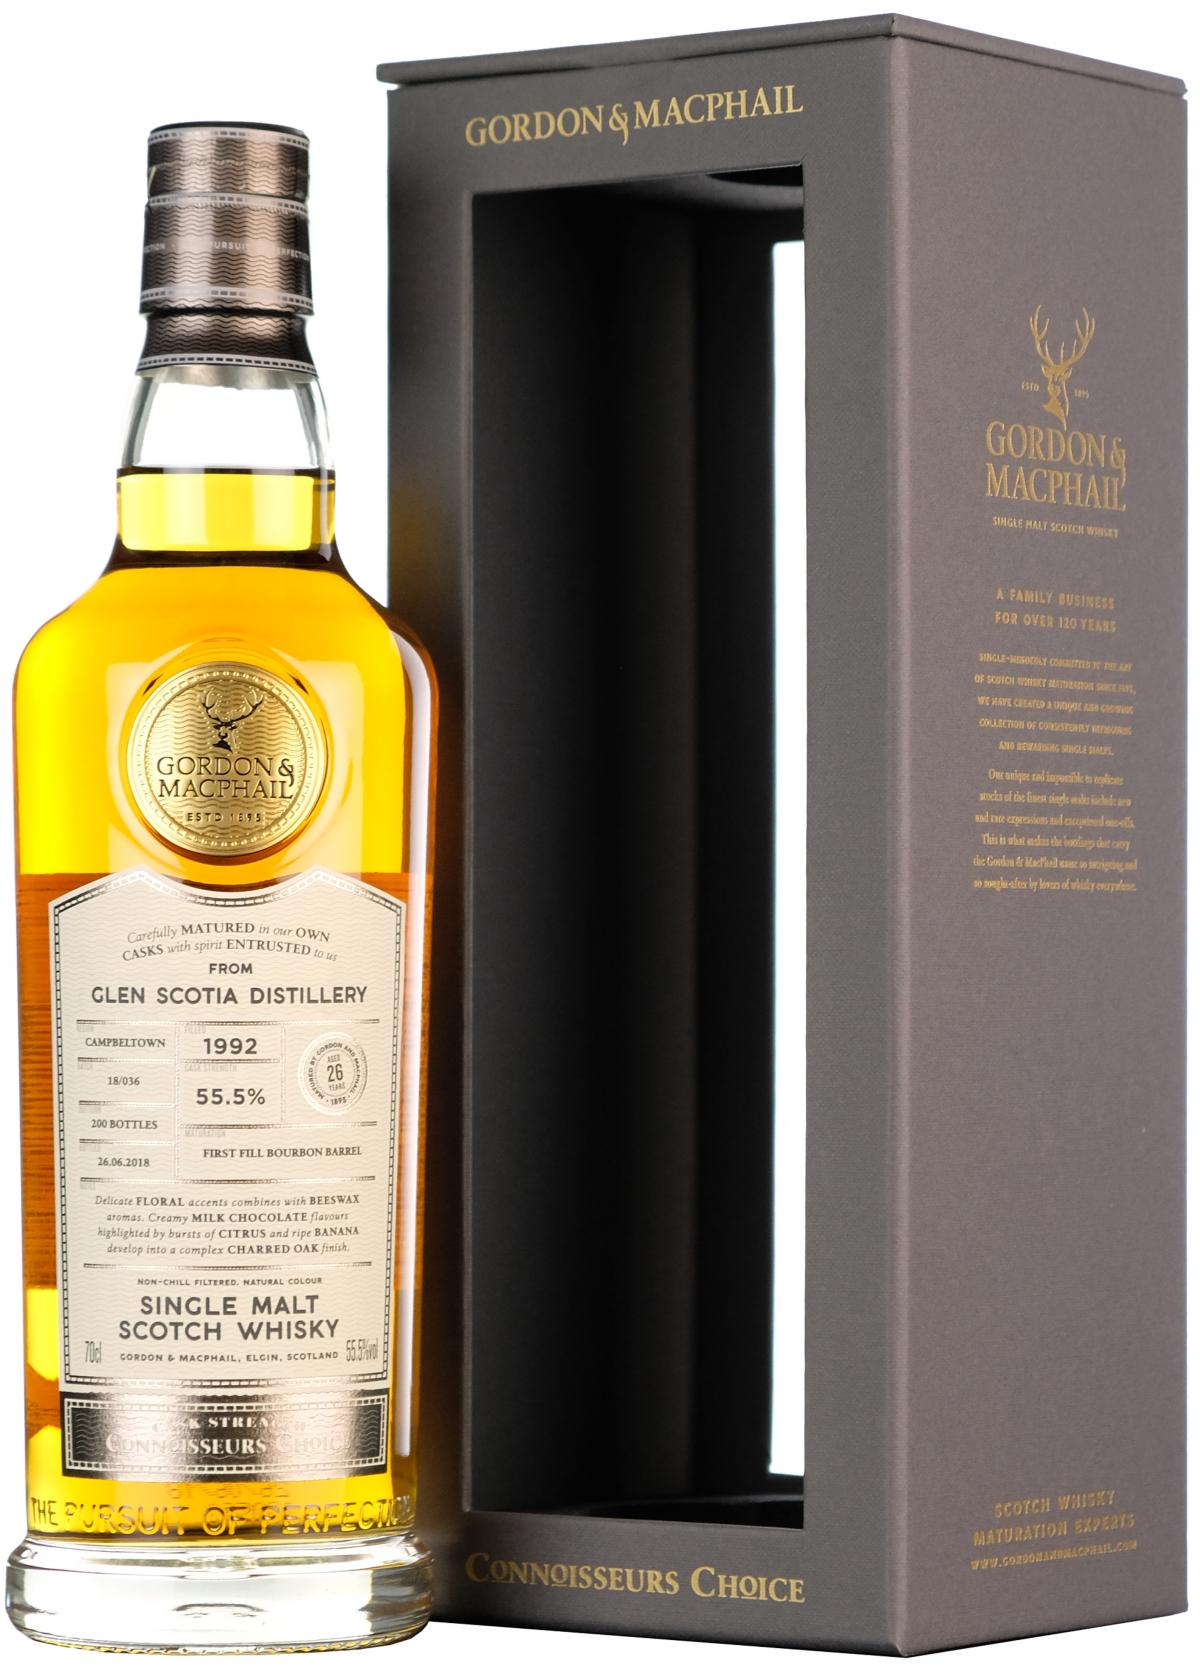 glen scotia 1992 26 year old connoisseurs choice, cask strength, gordon and macphail campbeltown single malt scotch whisky whiskey